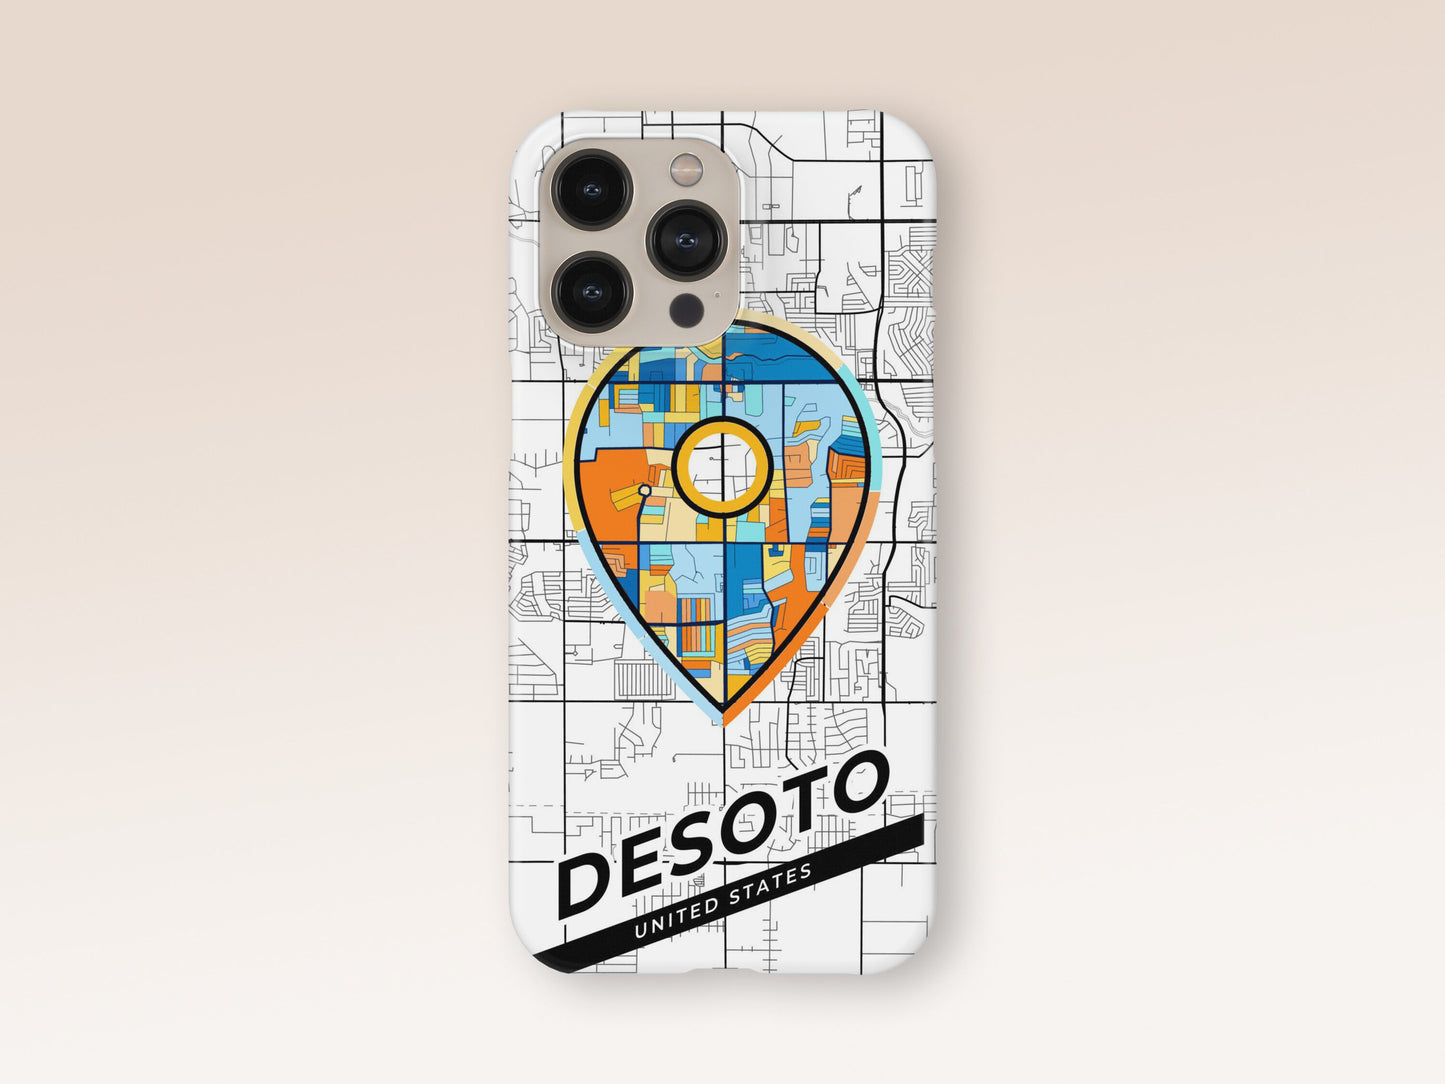 Desoto Texas slim phone case with colorful icon. Birthday, wedding or housewarming gift. Couple match cases. 1